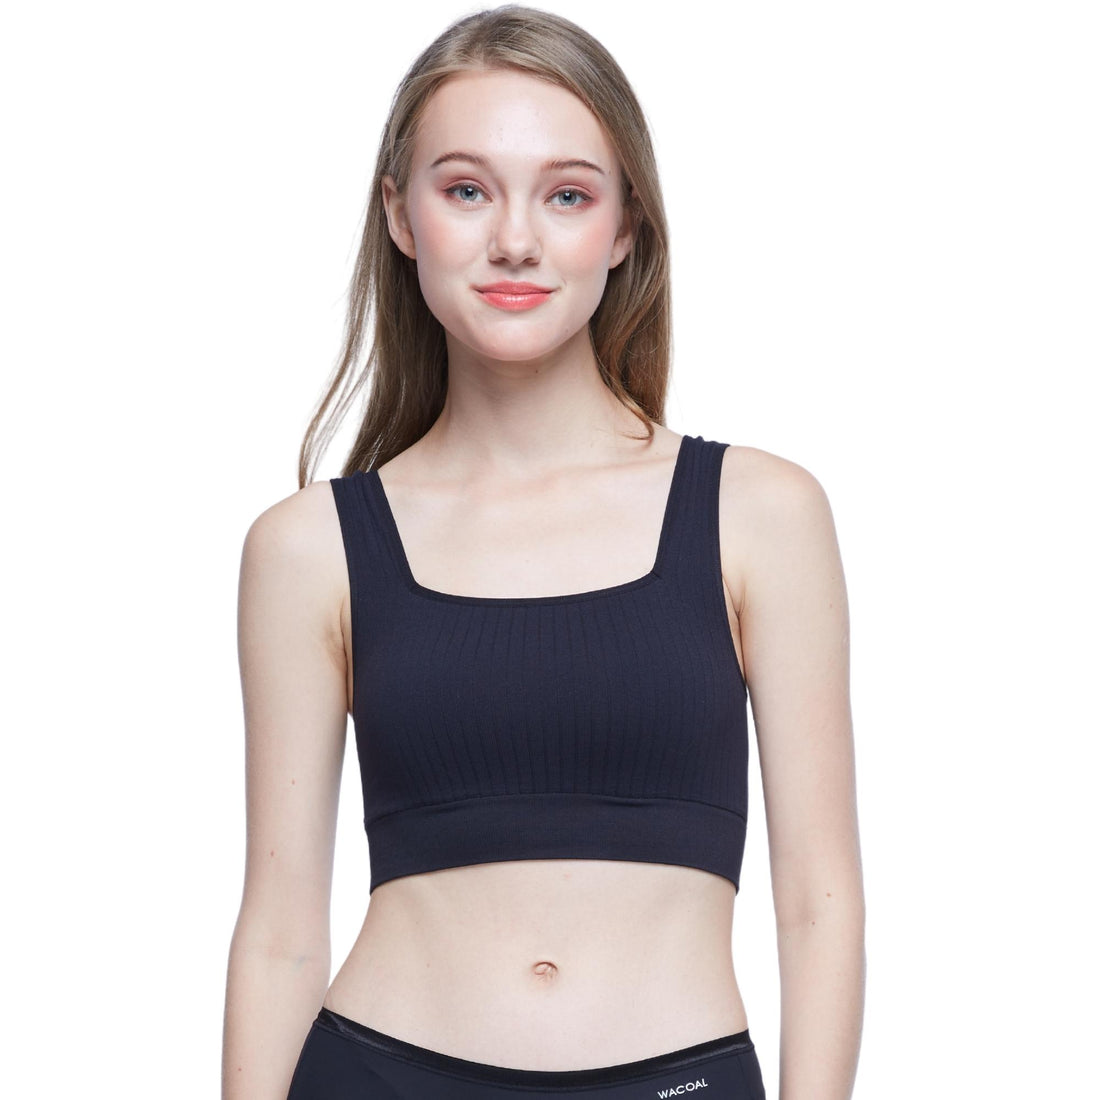 Wacoal Mood Comfy pullover bra with square neck pattern, model WH4M06, black (BL)